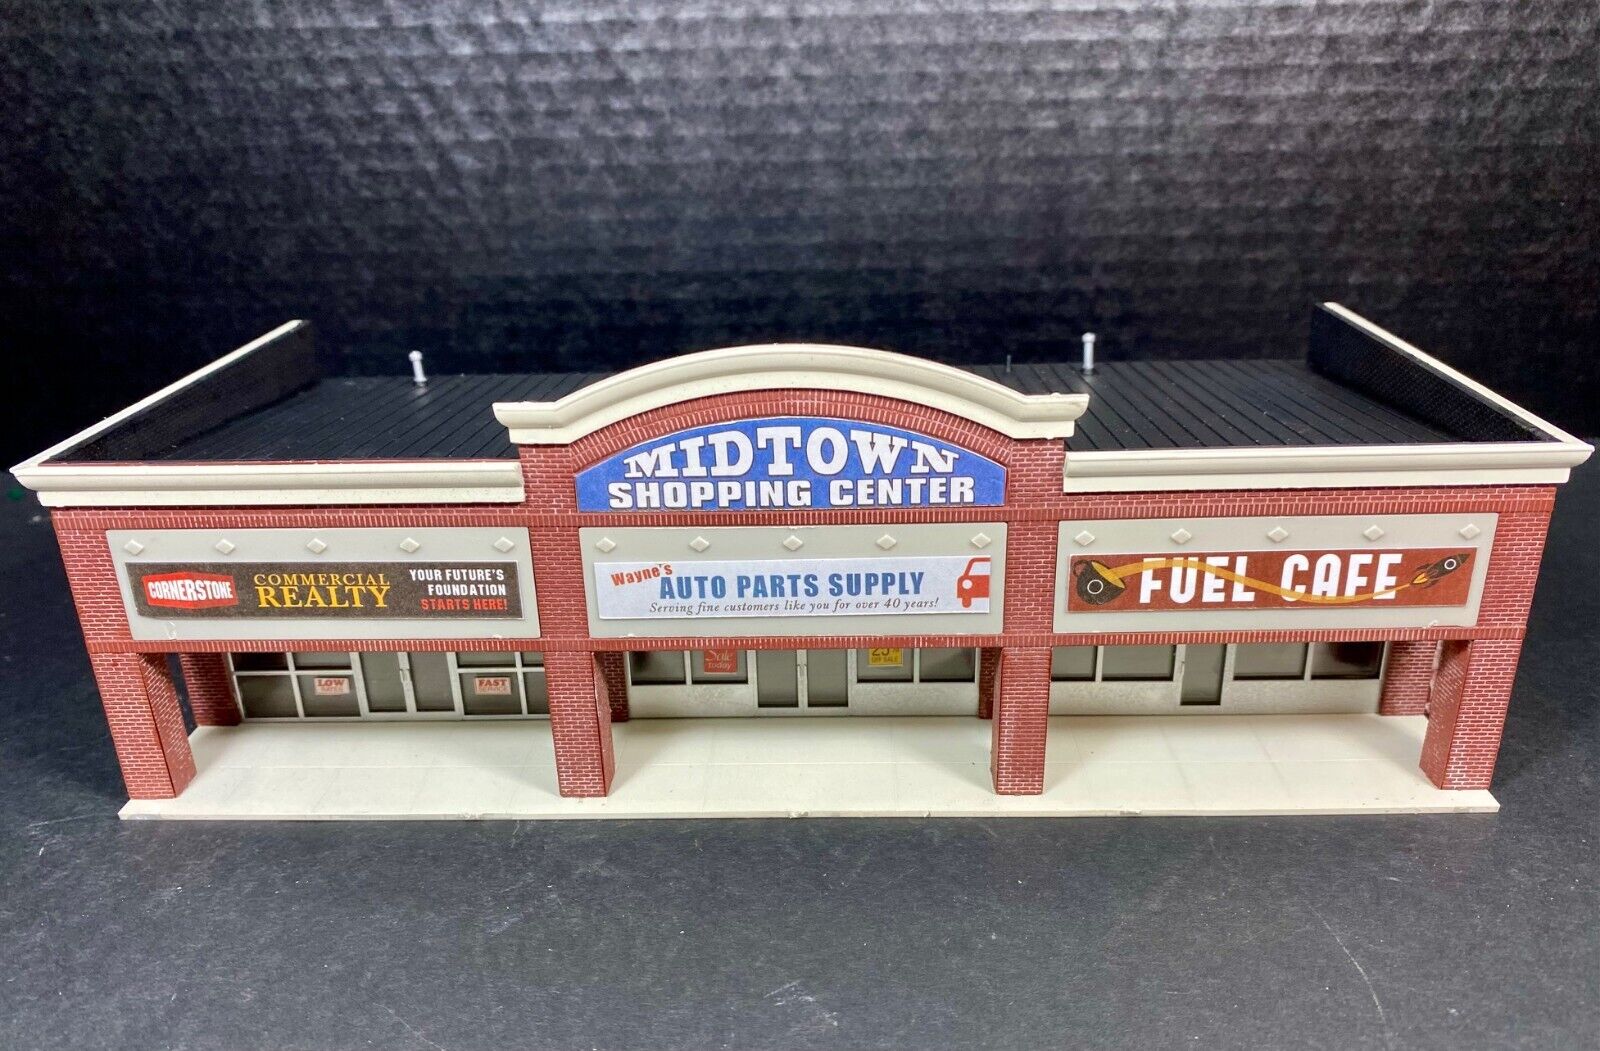 WALTHERS CUSTOM HO SCALE MODEL RAILROAD BUILT BUILDING DESIGN TRAIN LAYOUT CITY